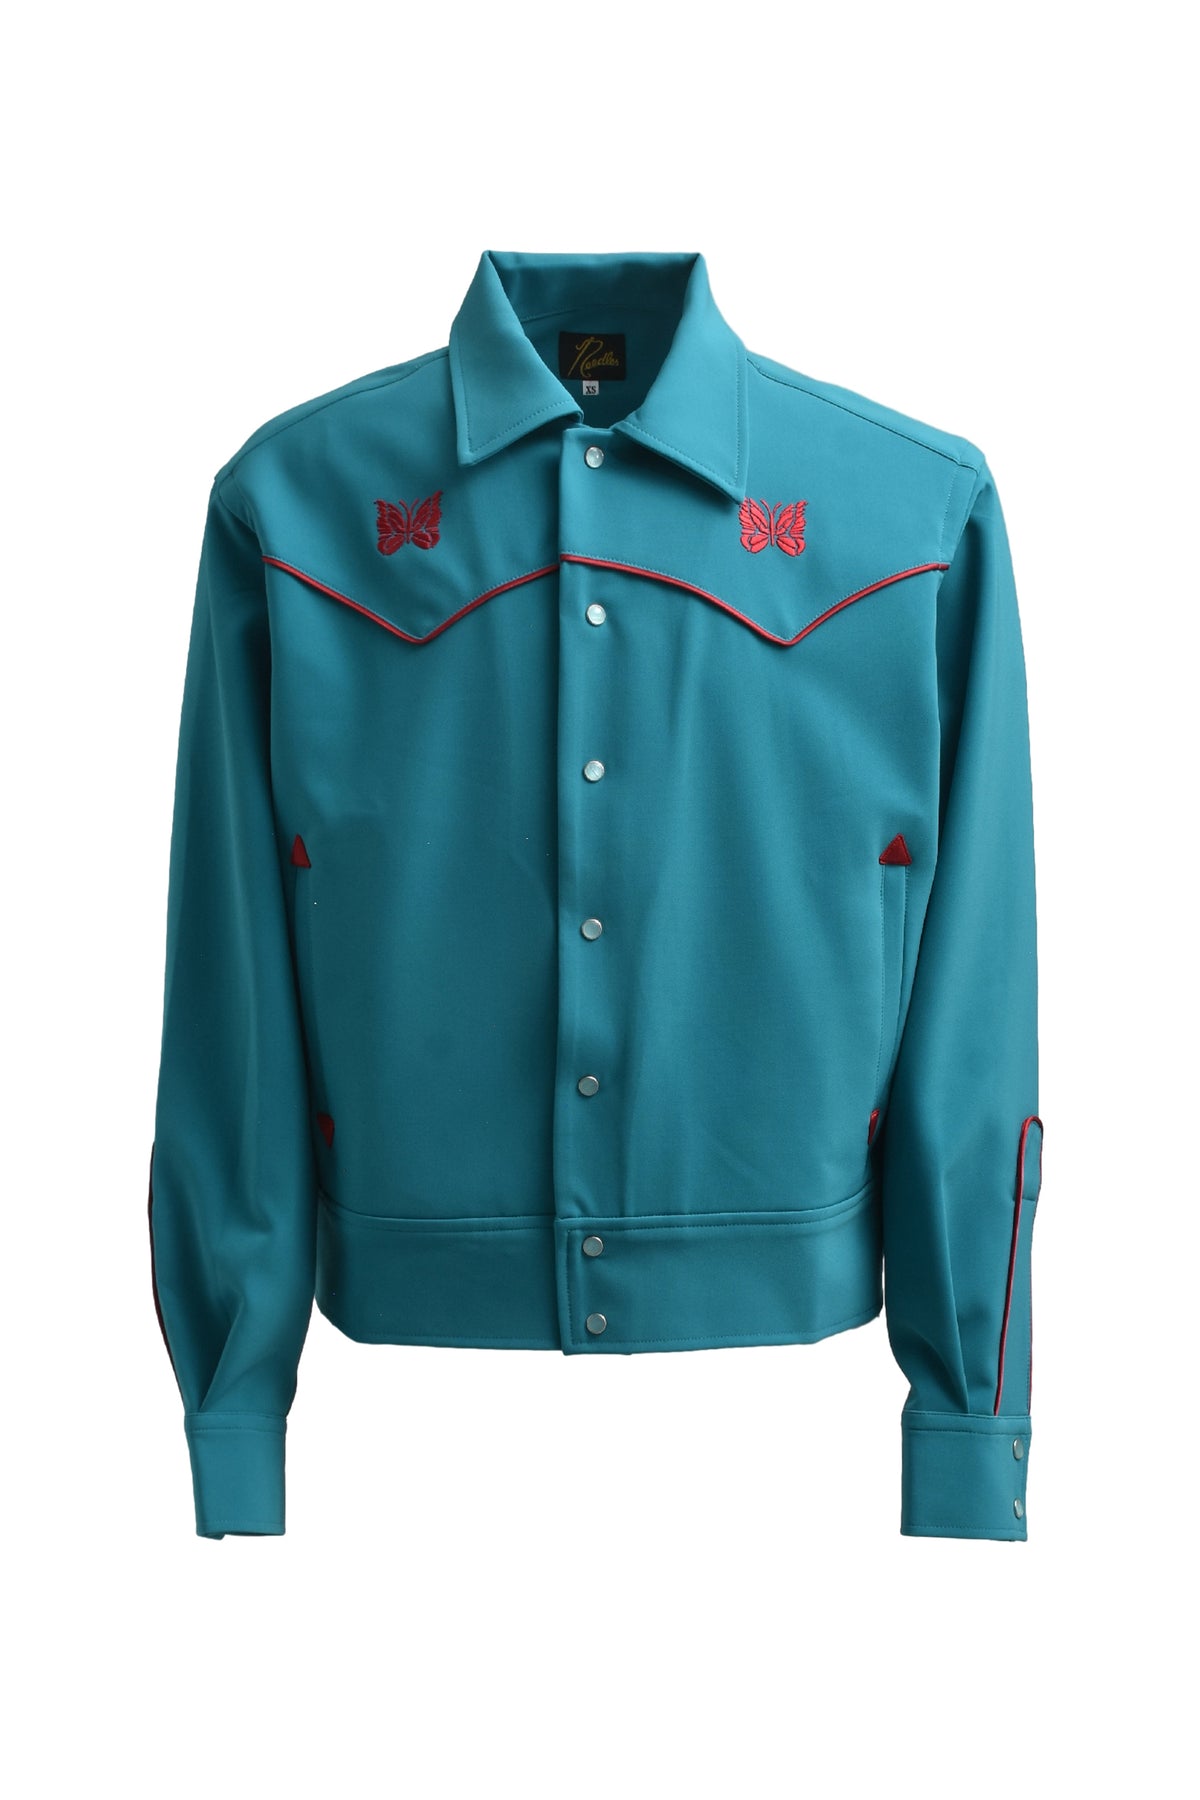 PIPING COWBOY JAC - PE/PU DOUBLE CLOTH / TURQUOISE